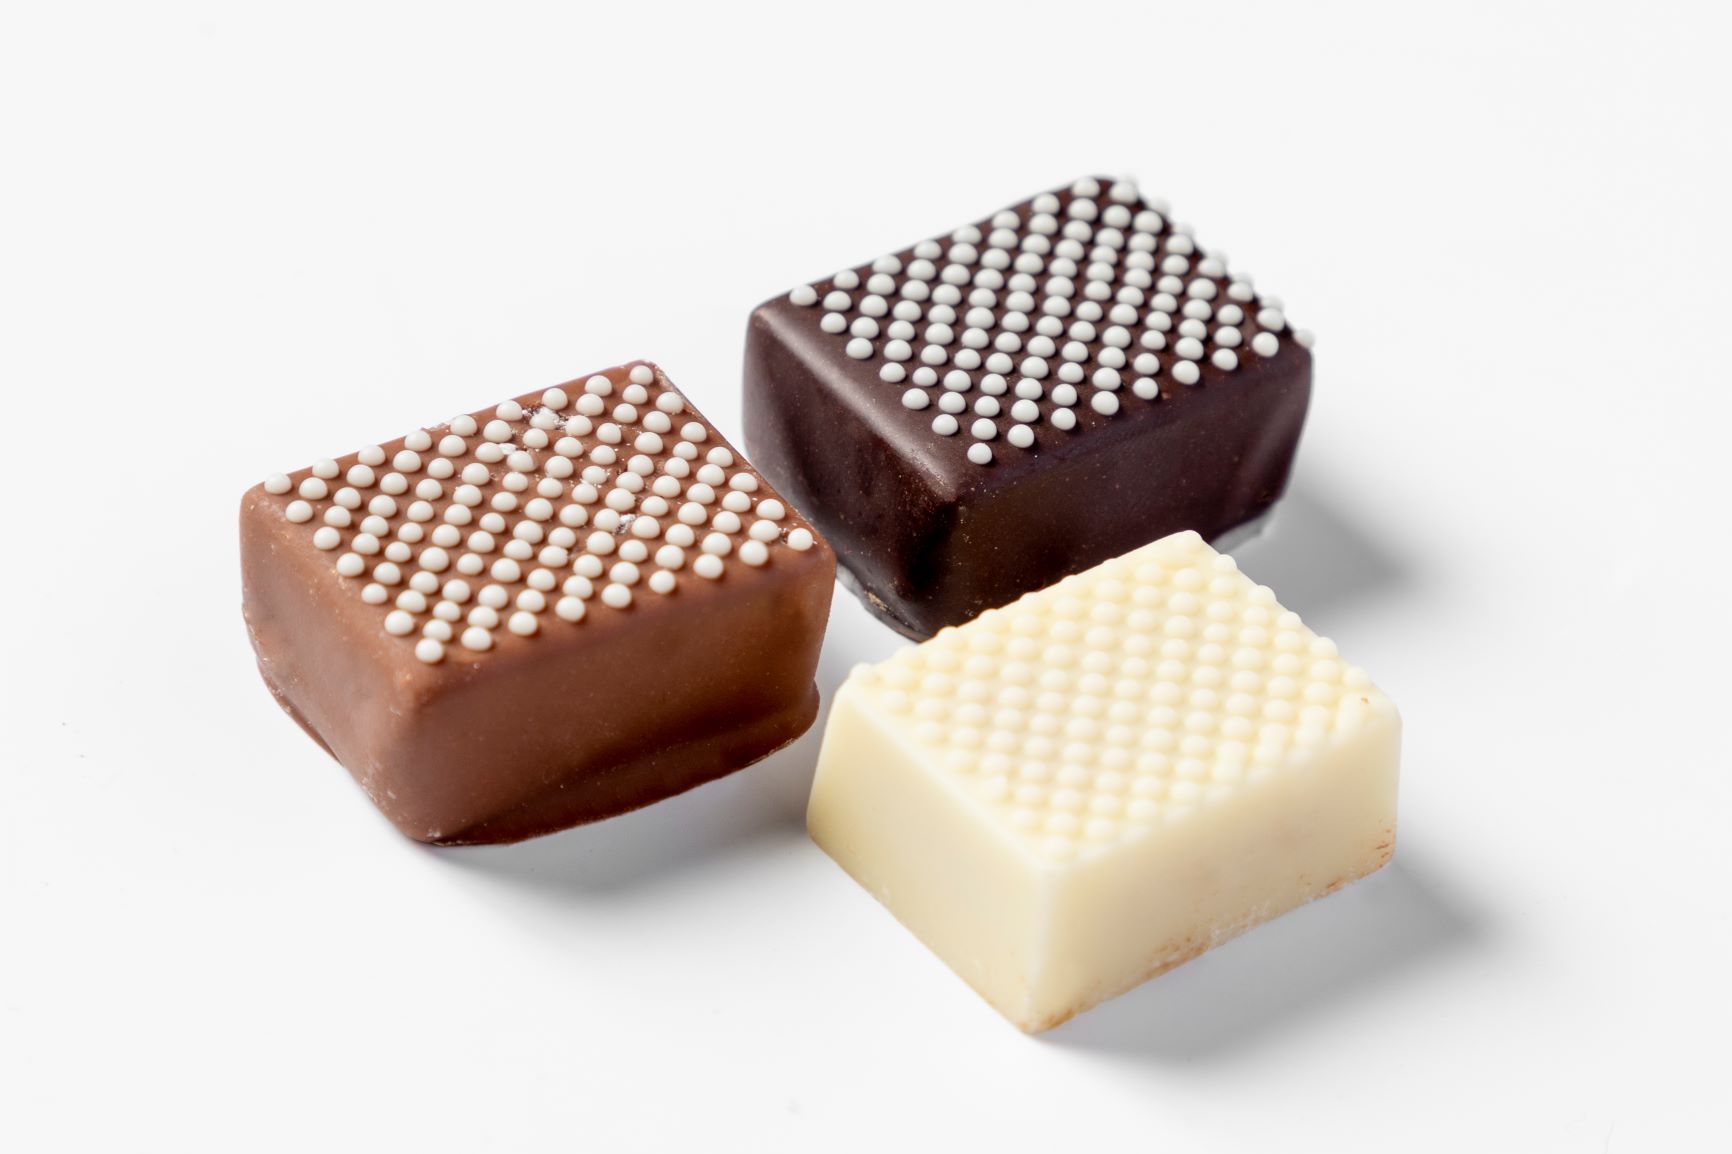 Three chocolate pralines decorated with a FoodJet chocolate depositor